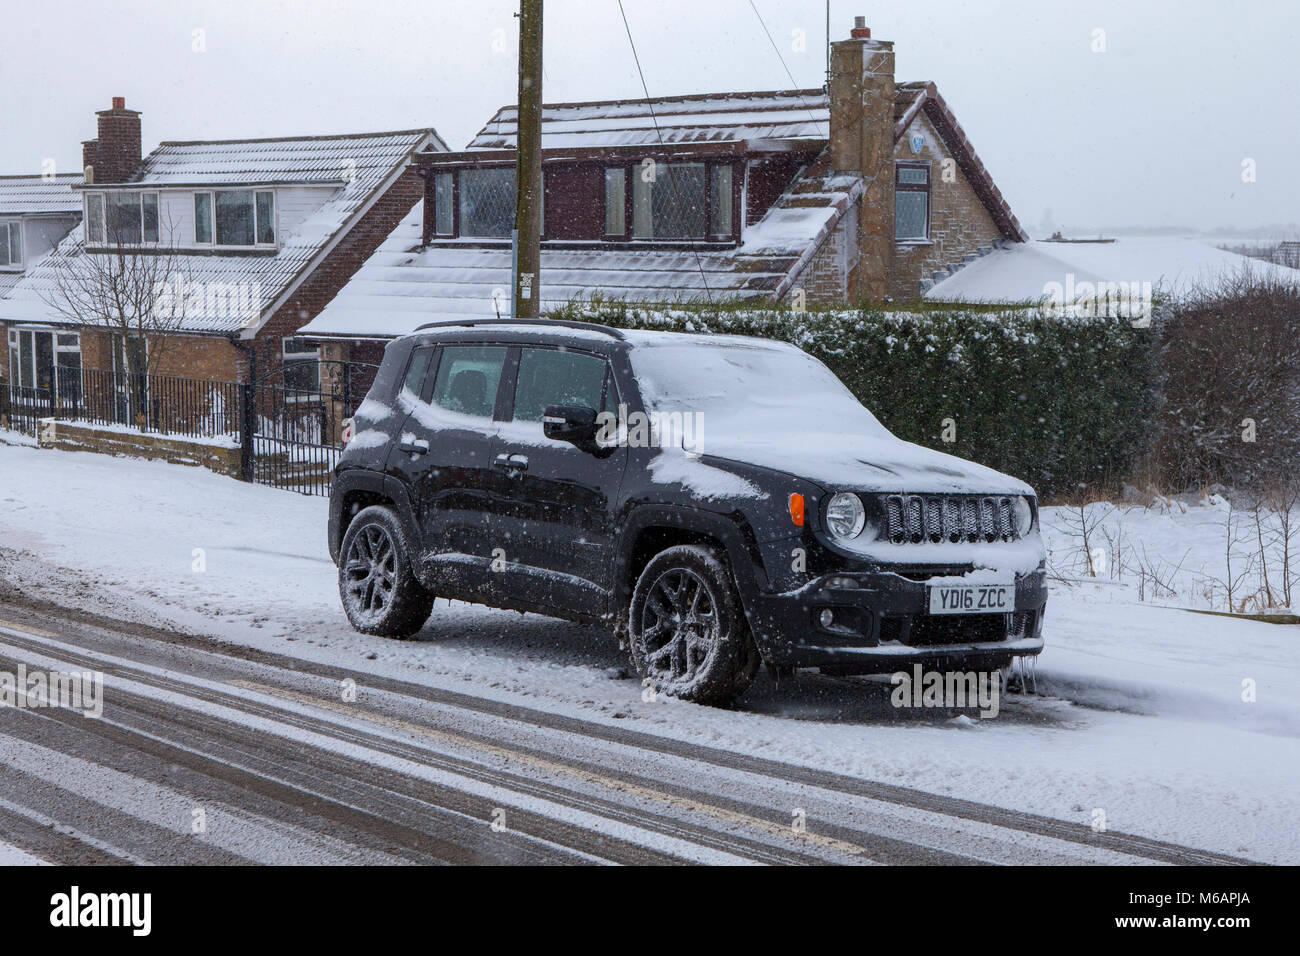 The freezing Arctic weather nicknamed the Beast from the East bringing snow and bad weather to Leeds freezing up a Jeep Renegade SUV Stock Photo